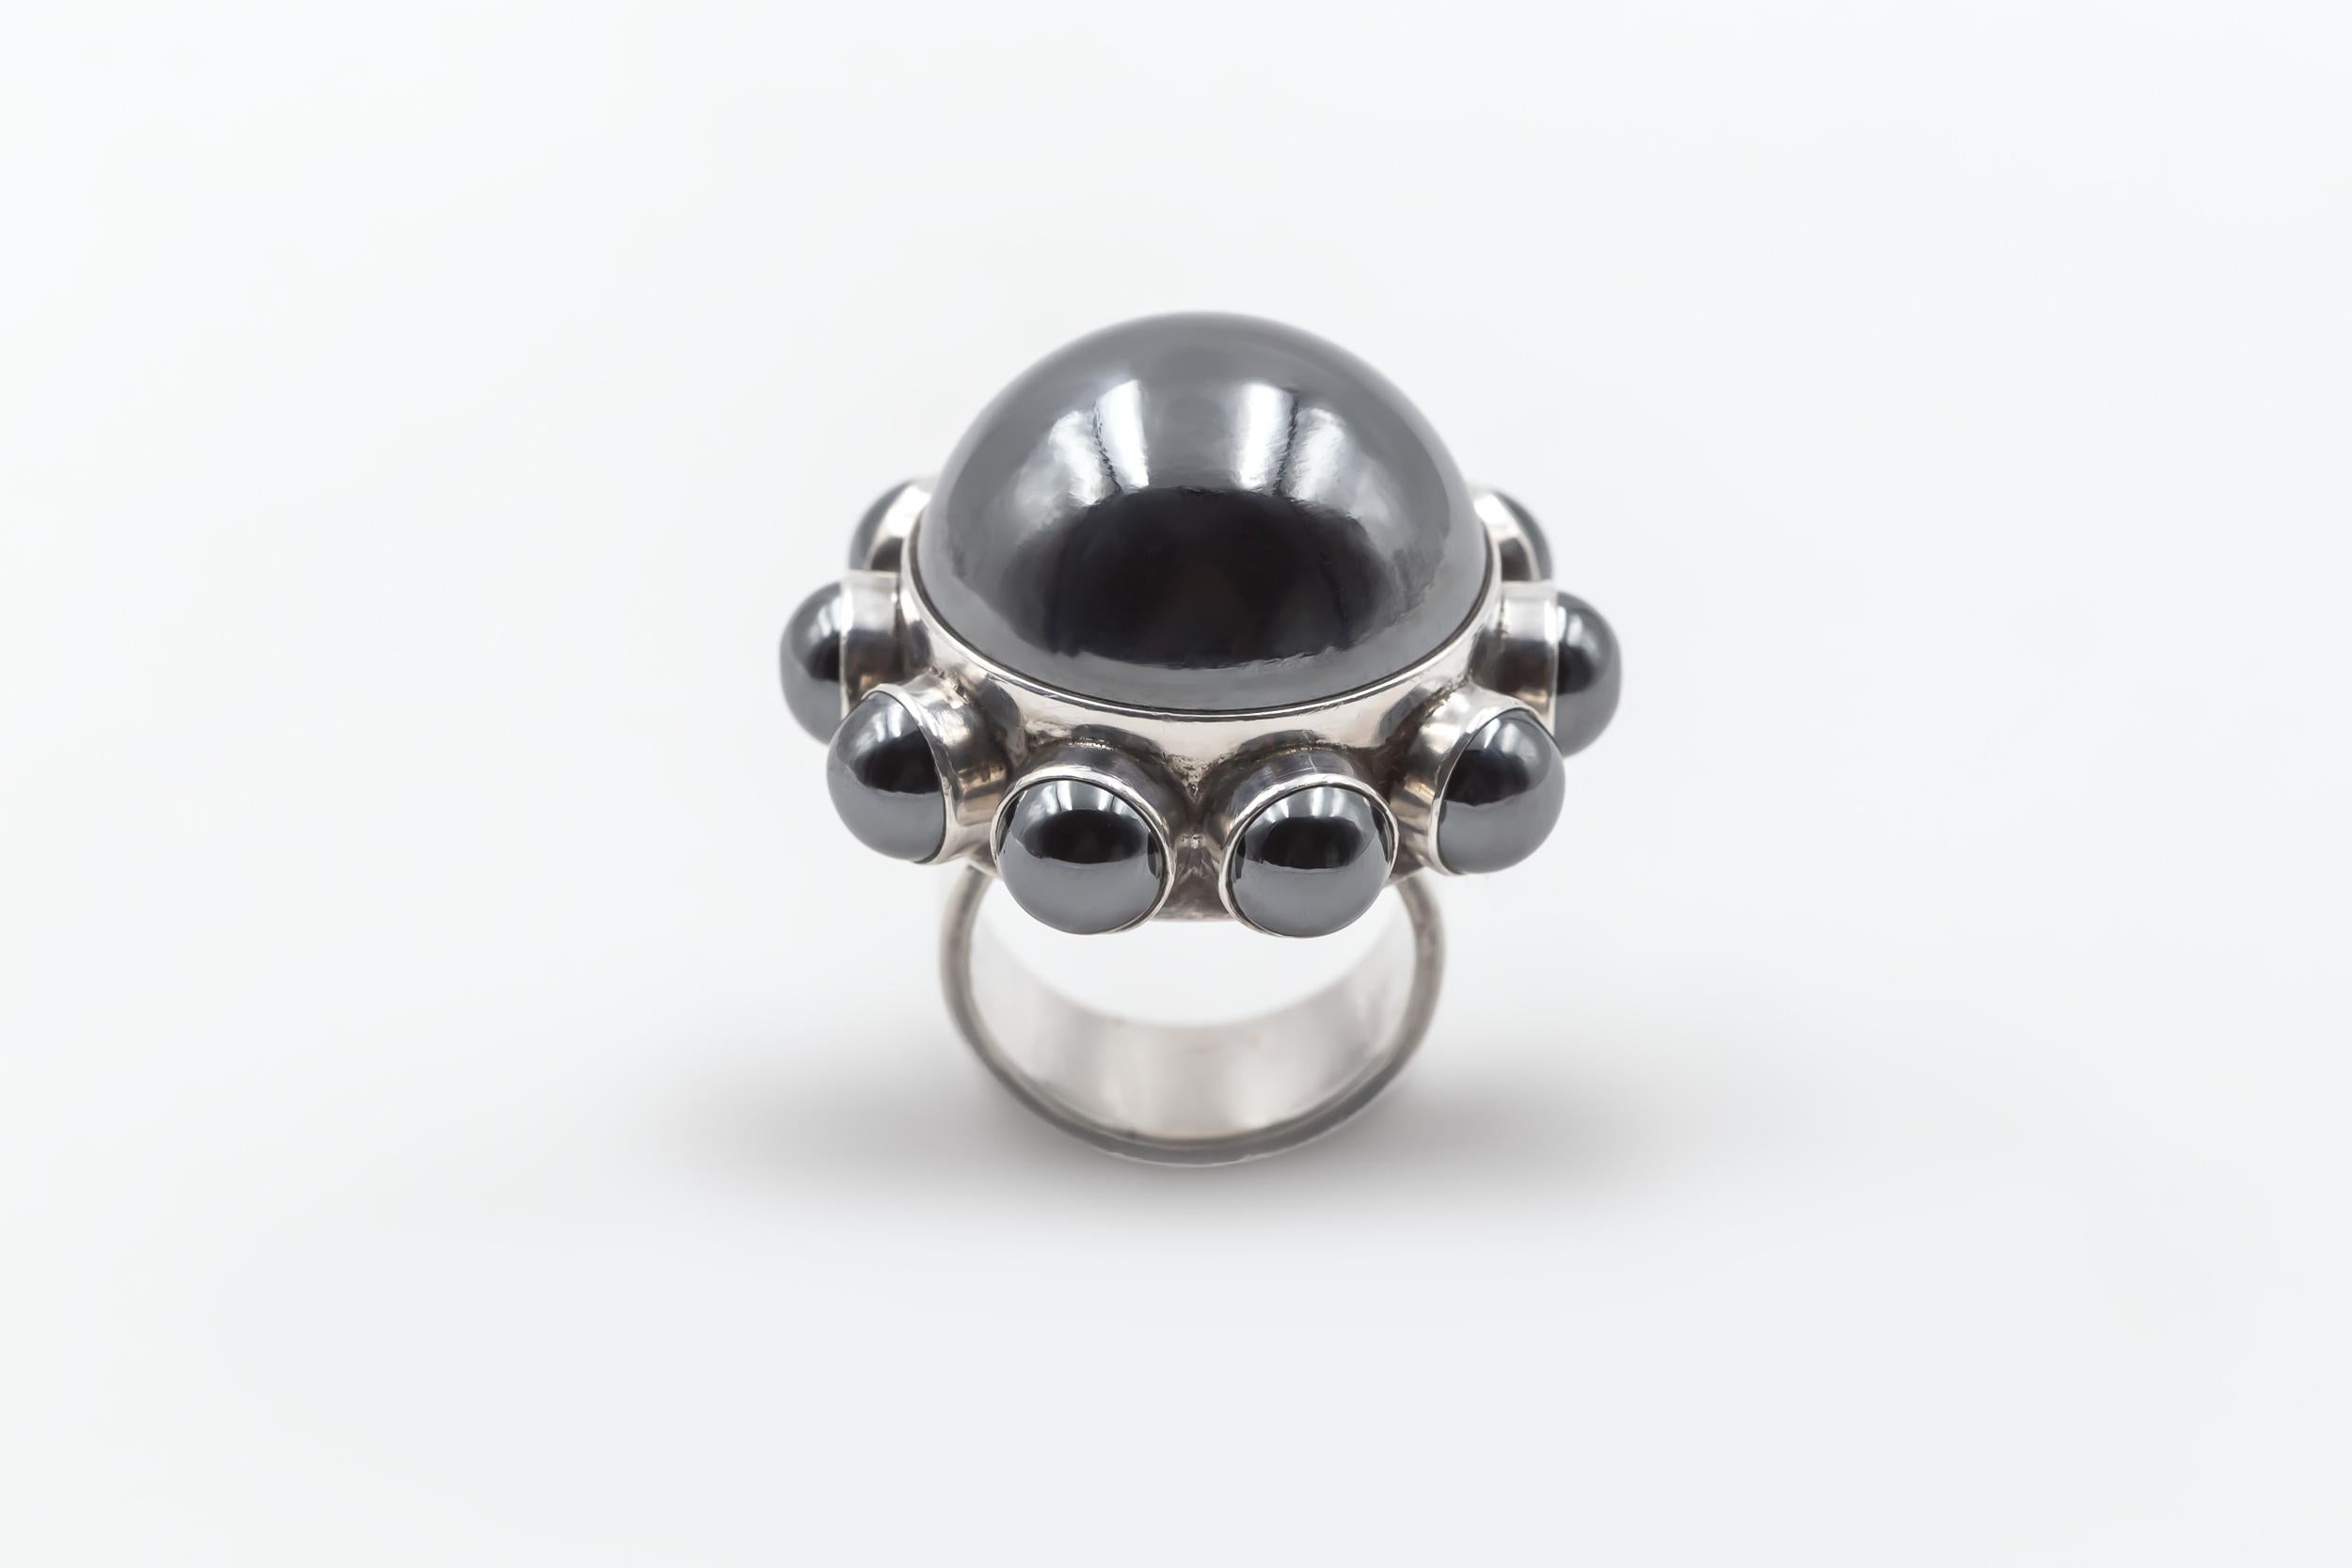 Ca 1970’s

Sterling silver - Hematite

Rare Model #166 designed by Astrid Fog for Georg Jensen

Diam 3,4 cm (1,34 inches)

Size 53

Marked : Georg Jensen in dotted oval - 166 - Denmark 925

In 1969, Astrid Fog released her first jewelry collection